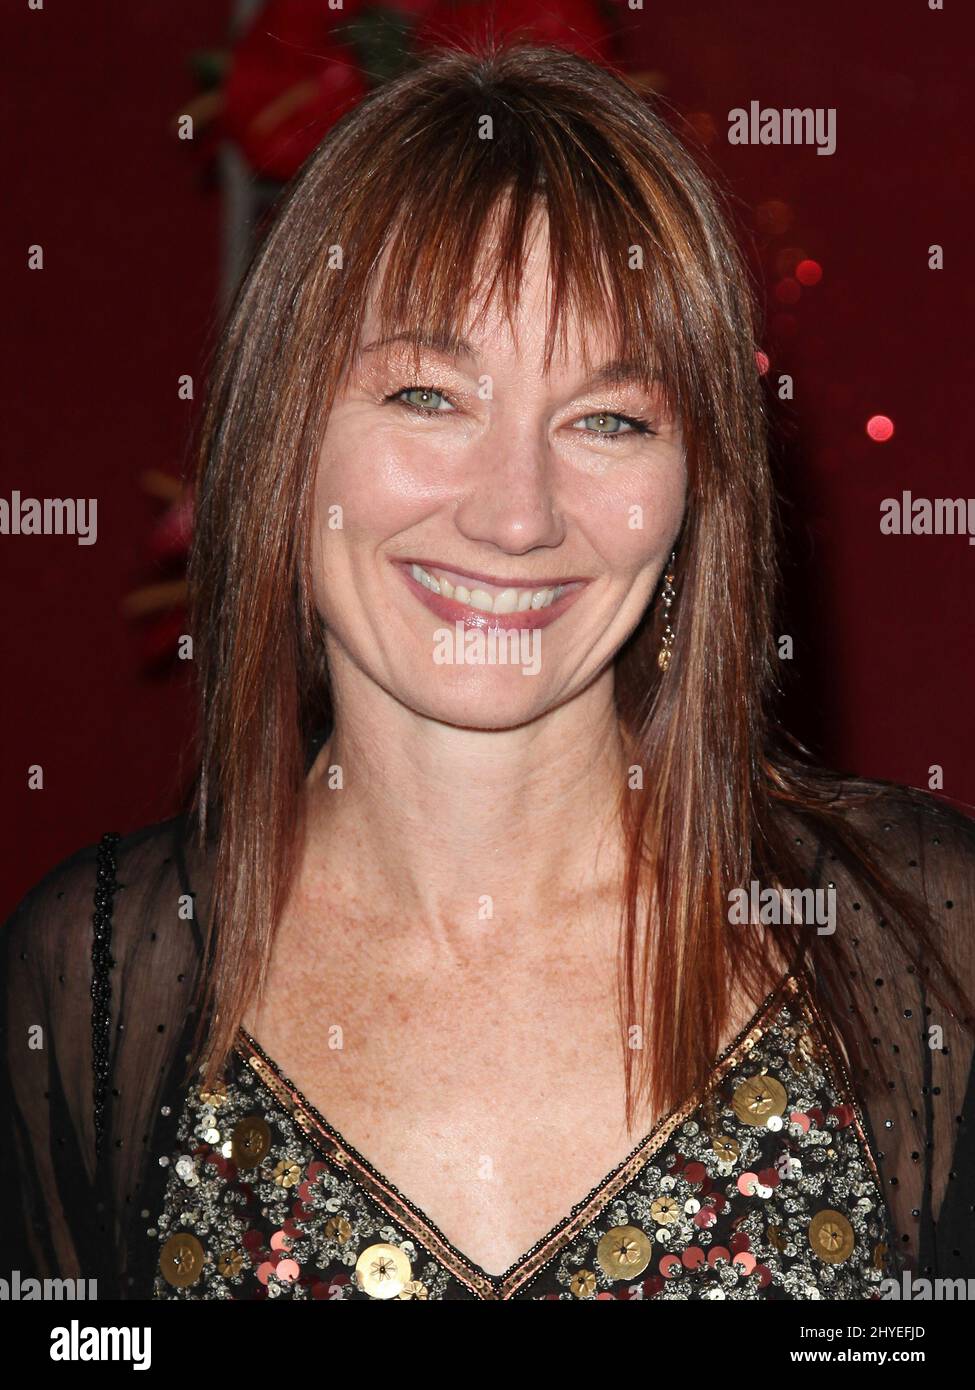 Country singer songwriter Lari White passed away today from cancer. November 9, 2010 Nashville, Tn. Lari White 58th Annual BMI Country Awards held at the BMI Music Row offices Stock Photo